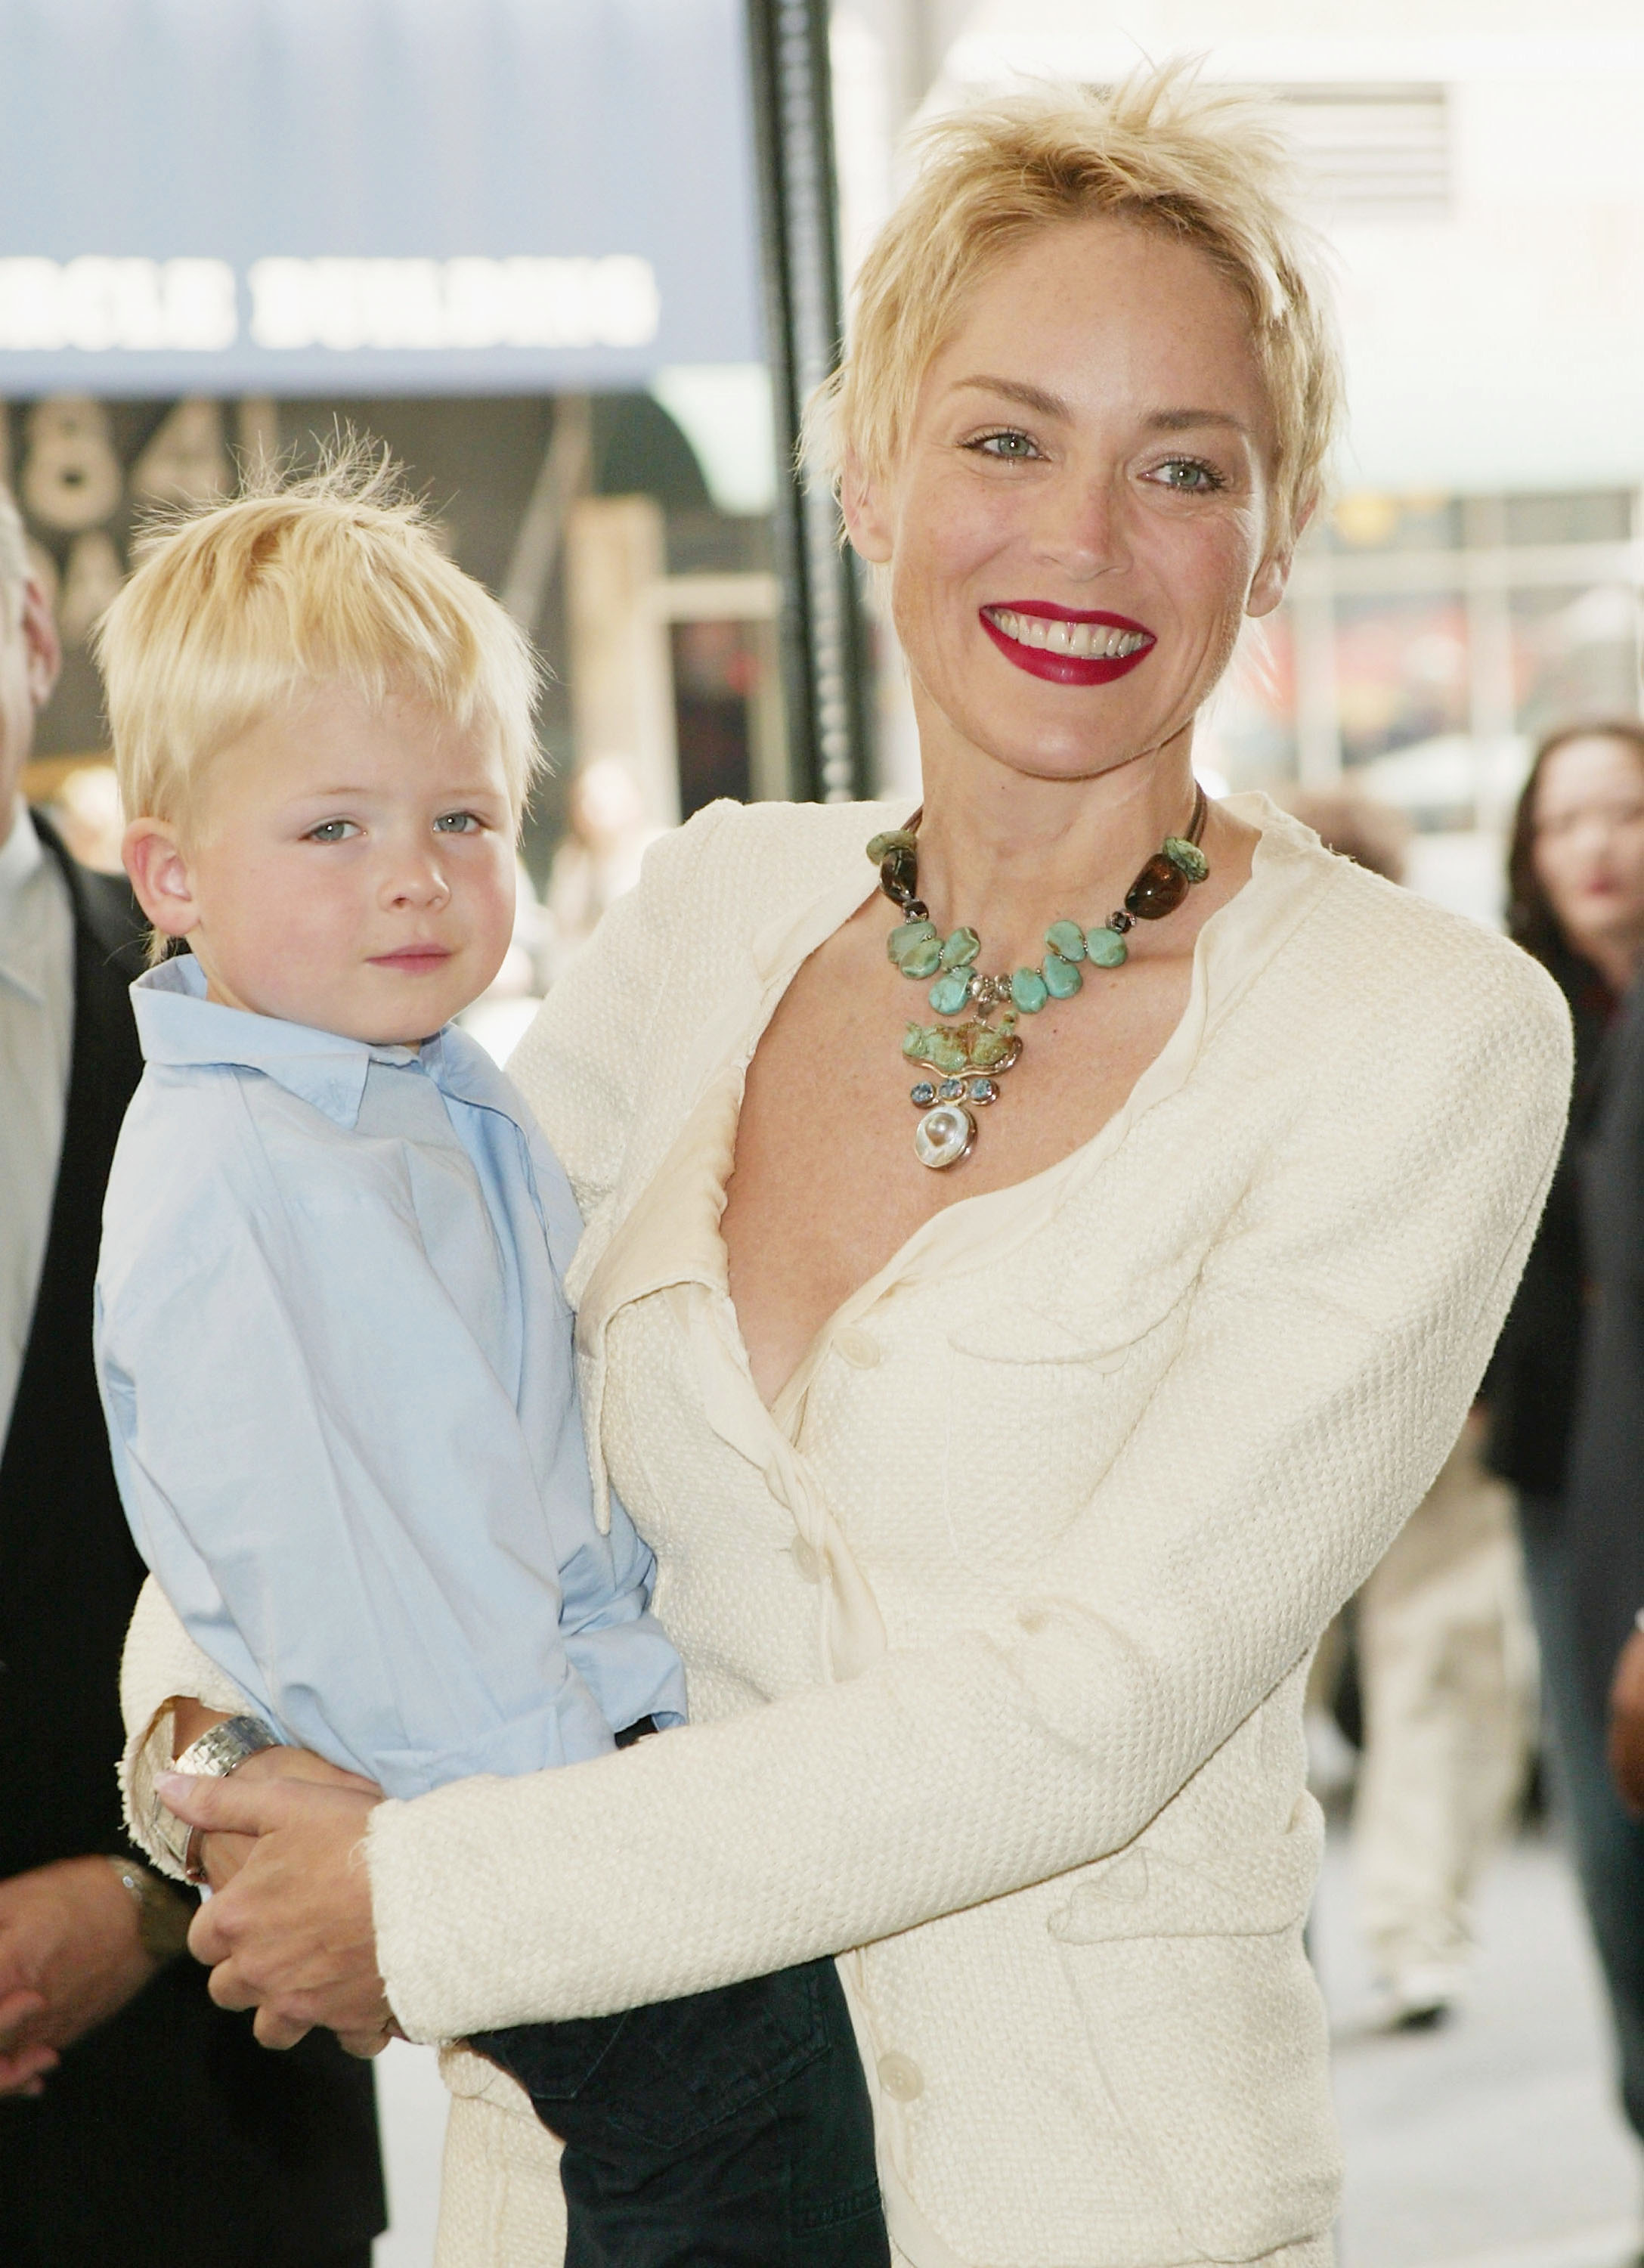 <p>Sharon Stone brought 3-year-old son Roan Bronstein -- whose father is her second husband, former newspaper editor Phil Bronstein (their divorce was finalized in 2004) -- to the Concerned Parents For AIDS Research Spring Luncheon at the Mandarin Oriental Hotel in New York City on April 22, 2004.</p>